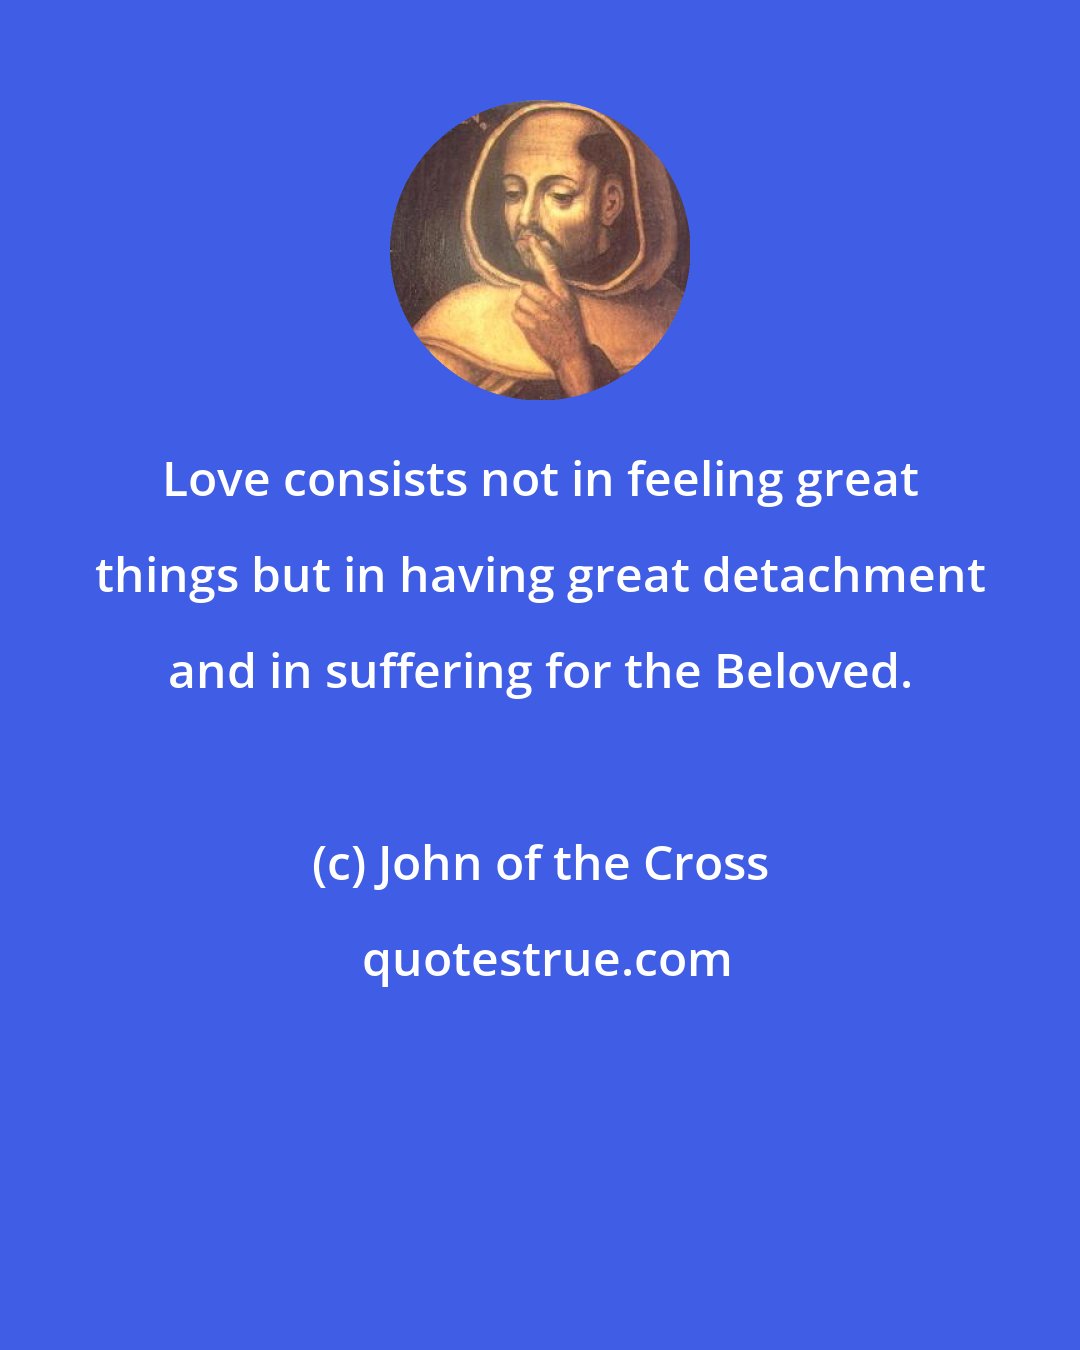 John of the Cross: Love consists not in feeling great things but in having great detachment and in suffering for the Beloved.